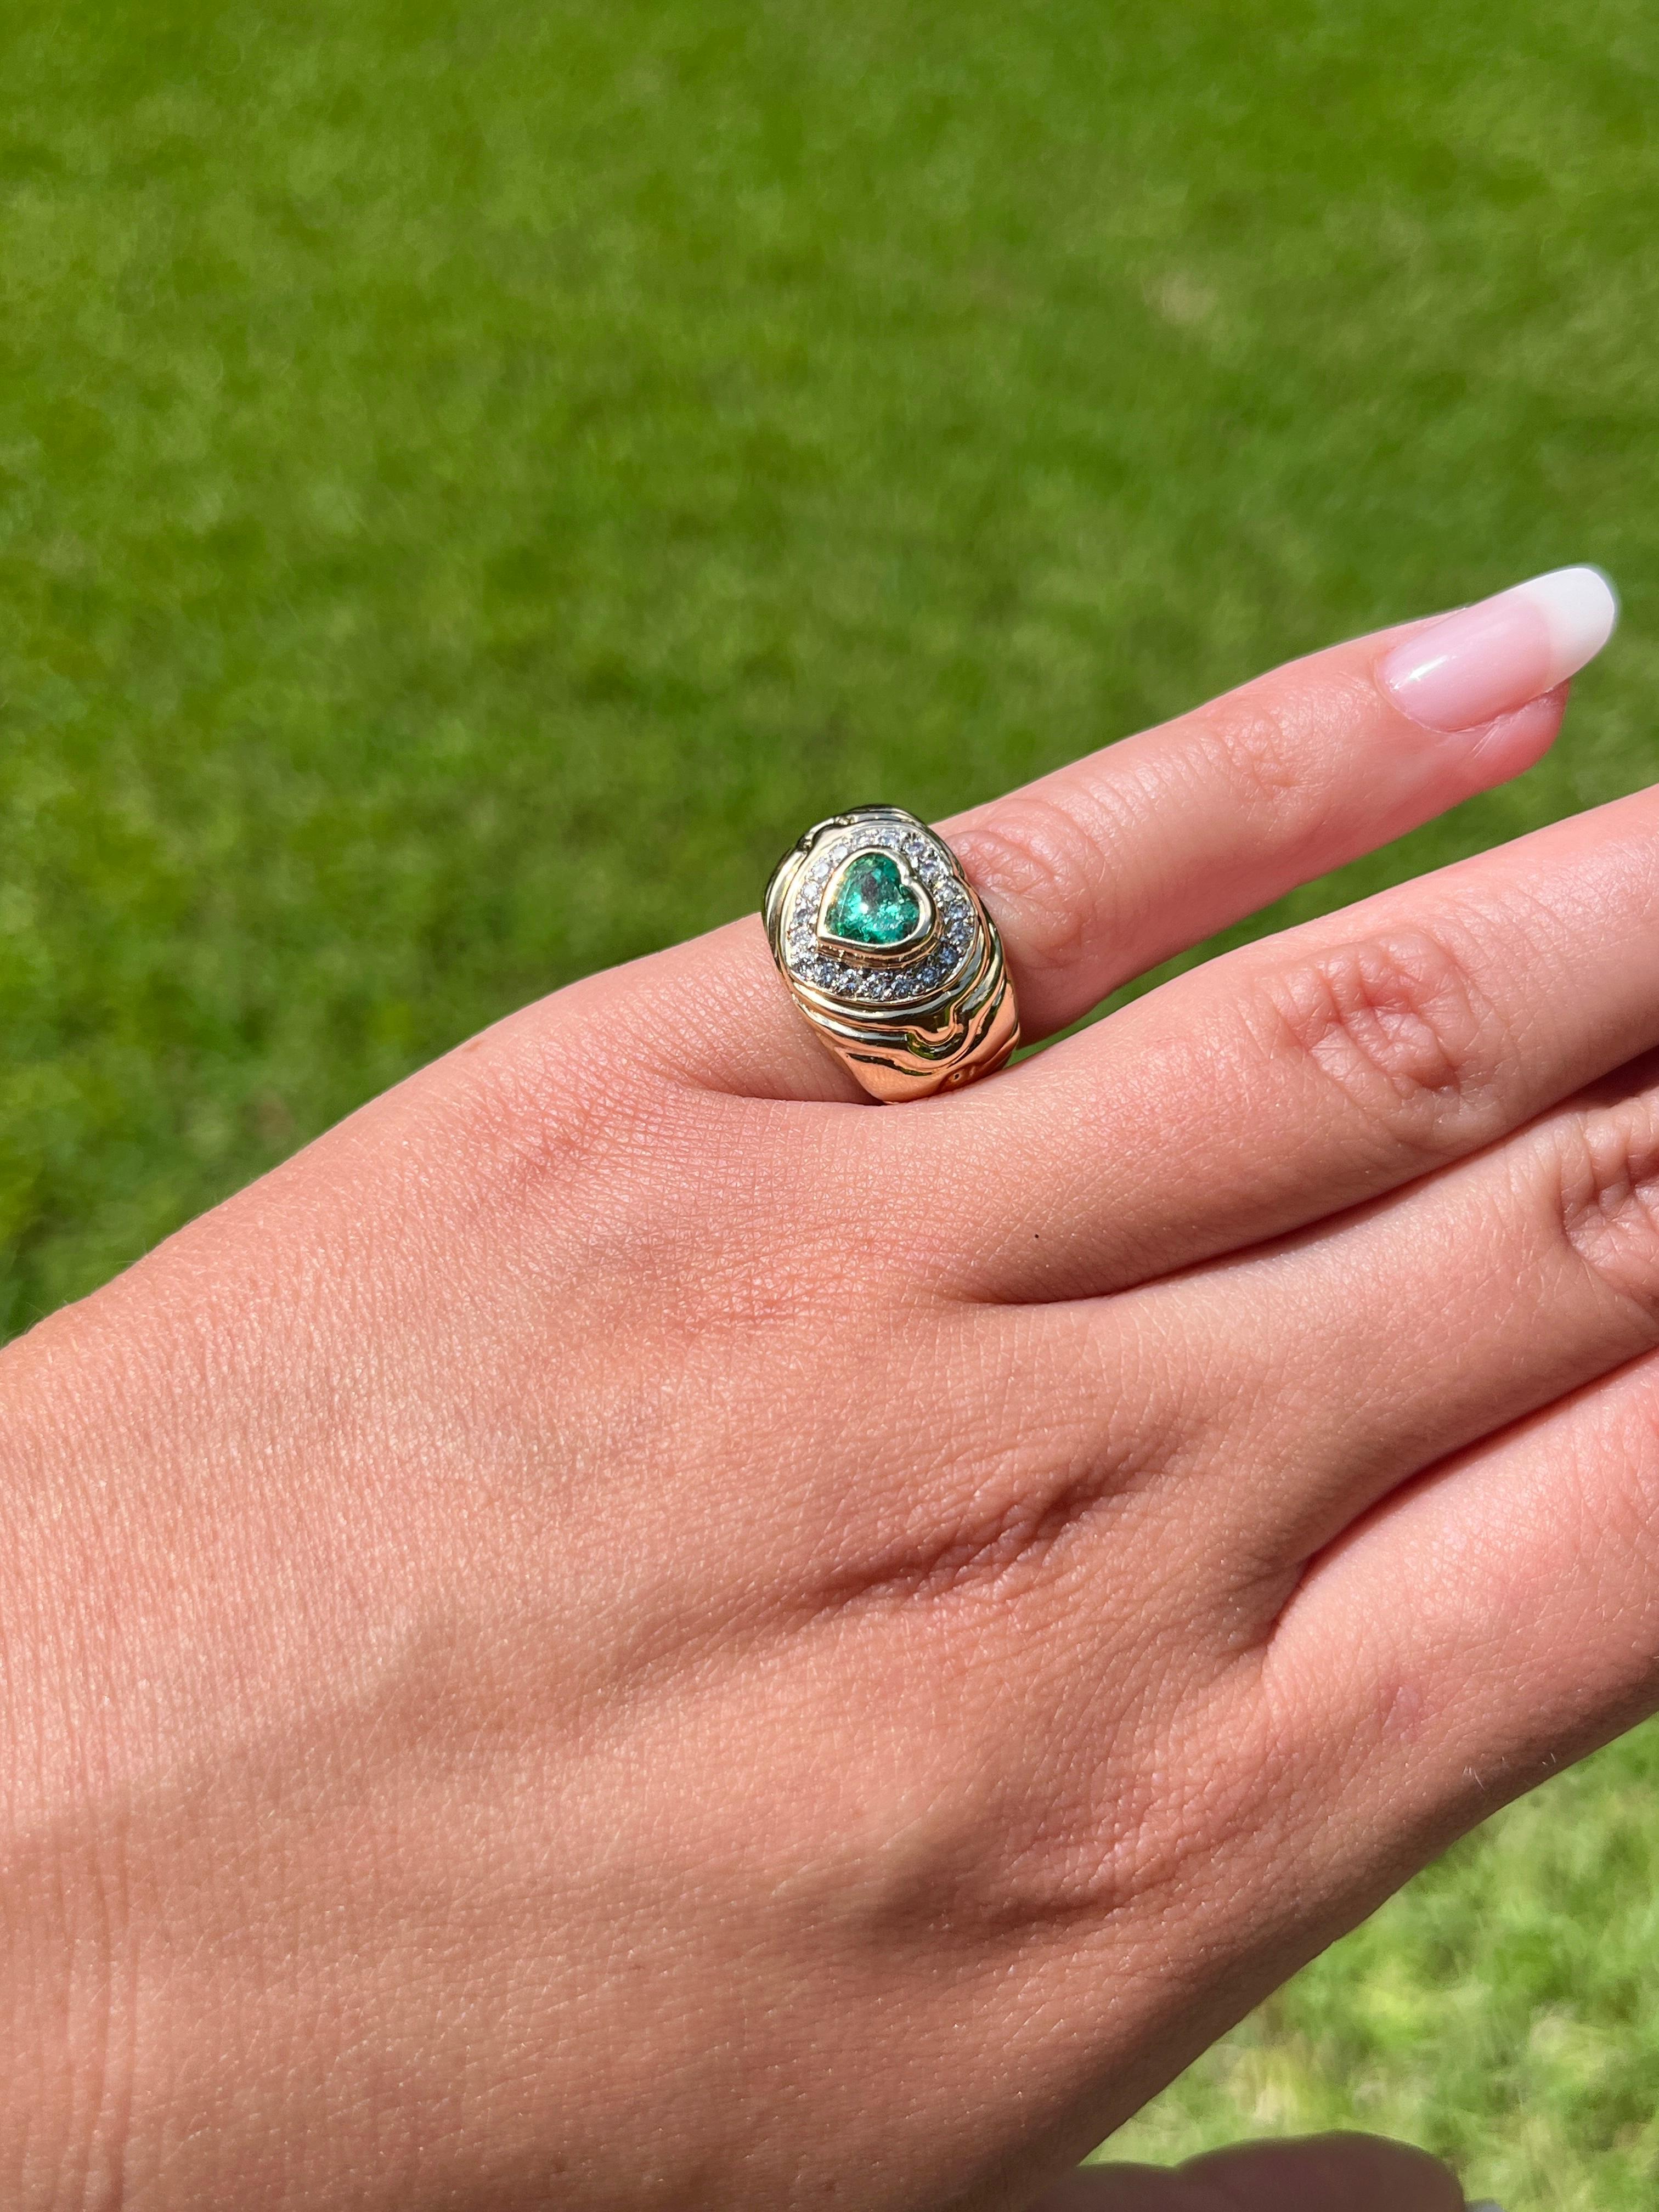 Heart cut natural emerald and round cut diamond ring in 14k solid gold. Set in a wide face heart motif bezel setting and textured ring shank. This wide shank ring is a 13mm width that provides excellent coverage on the finger. Textured ring shank